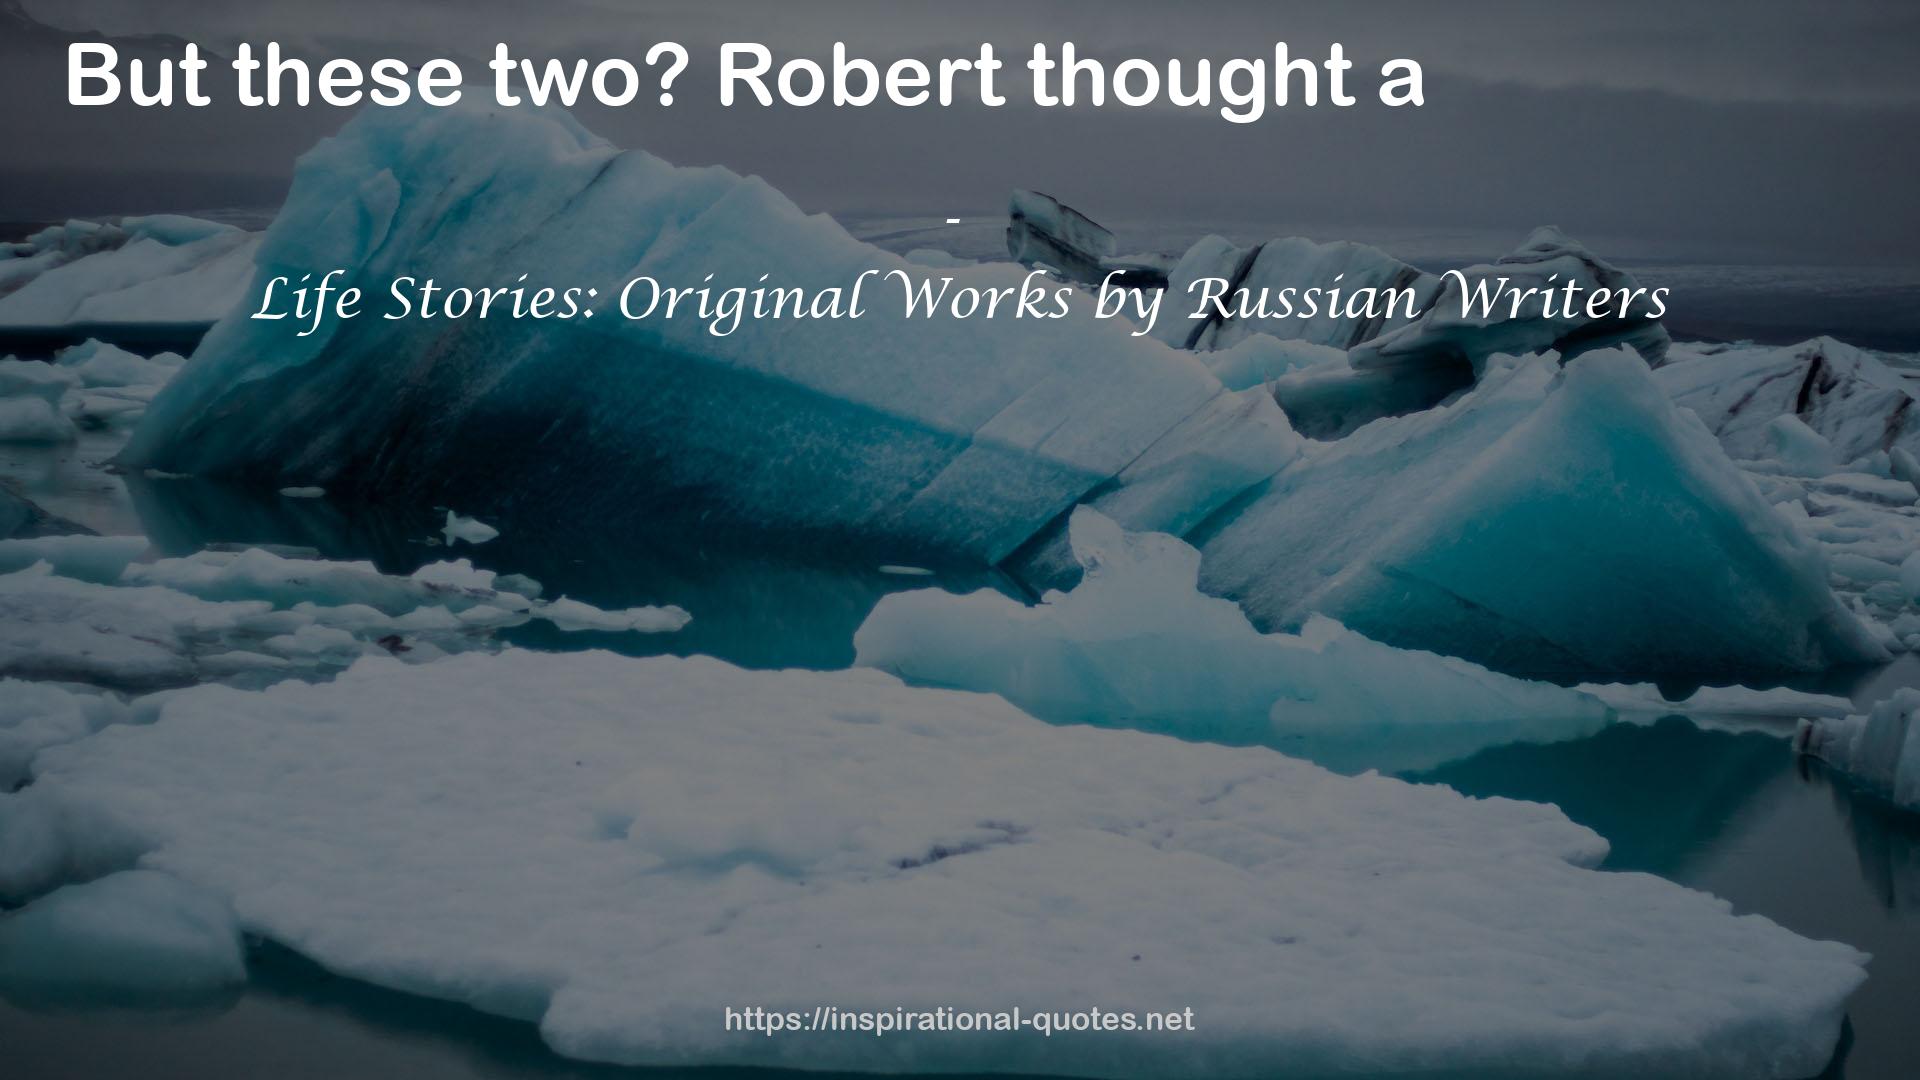 Life Stories: Original Works by Russian Writers QUOTES